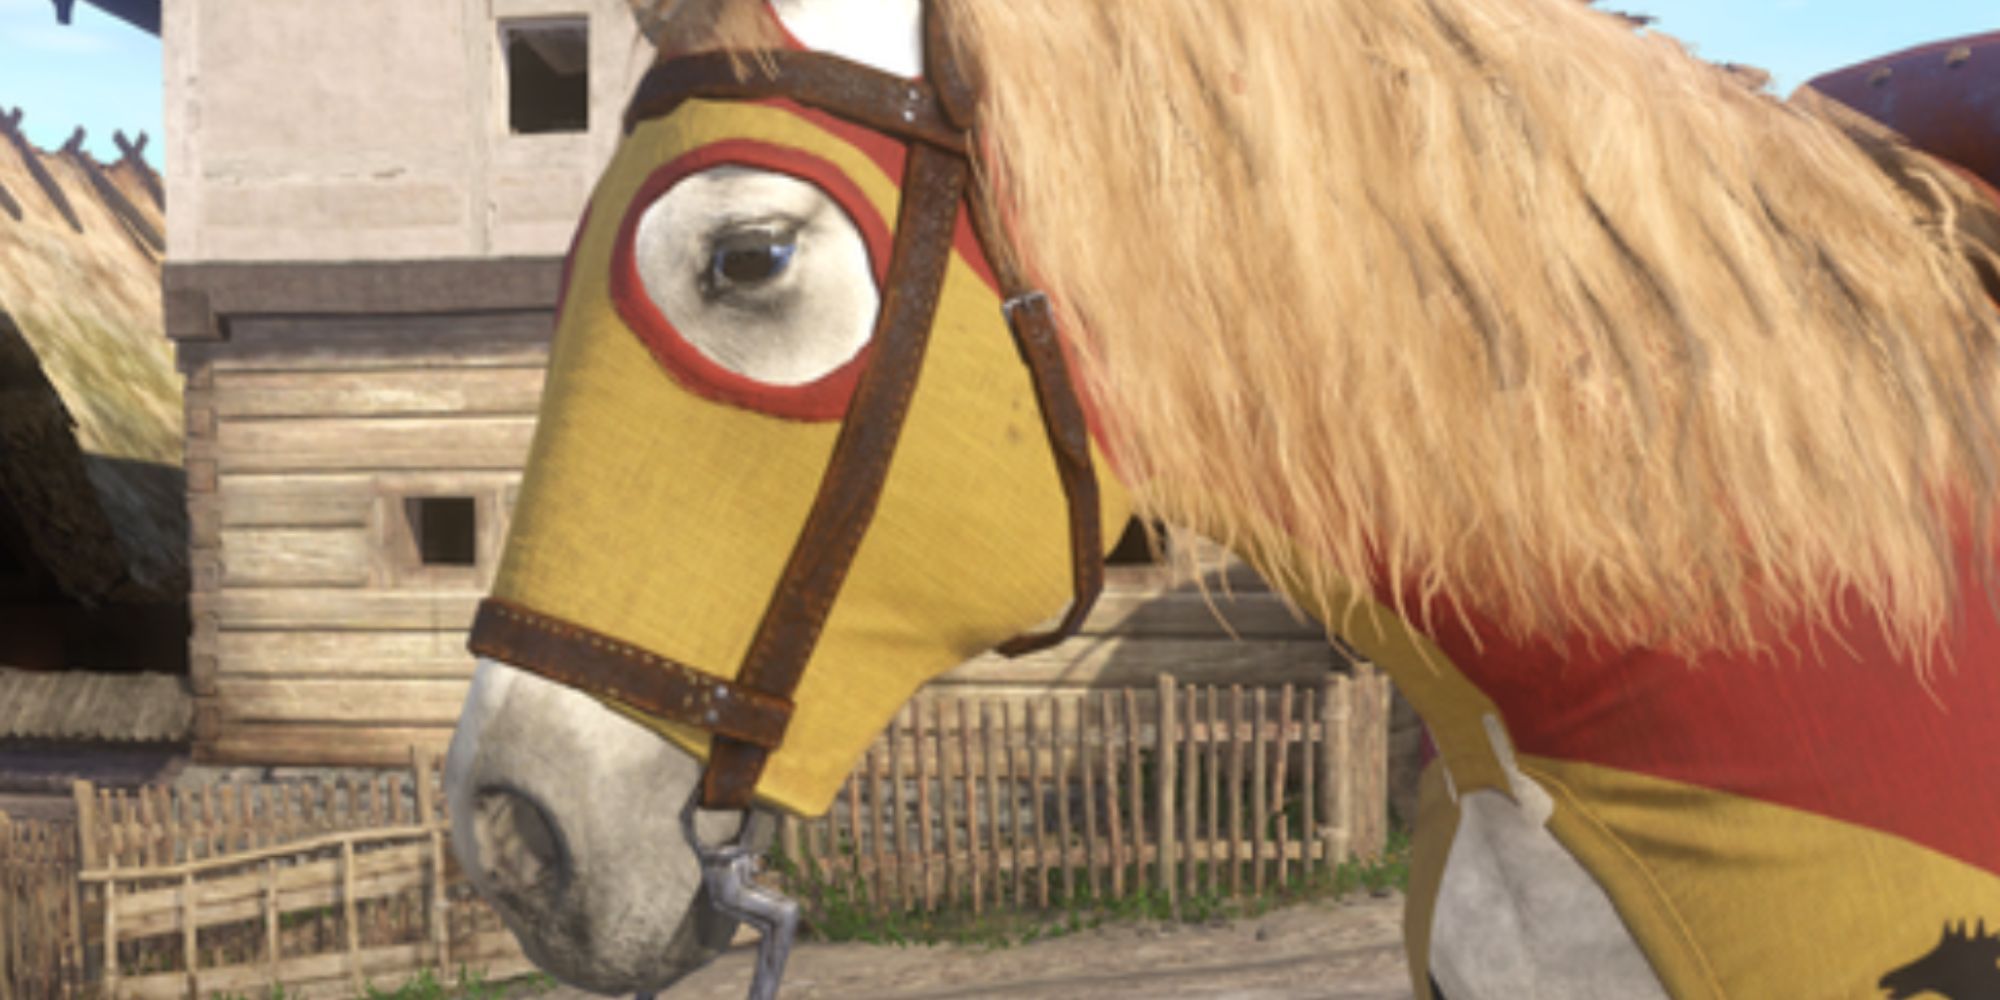 kingdom_come_deliverance_horse_outside_during_the_day